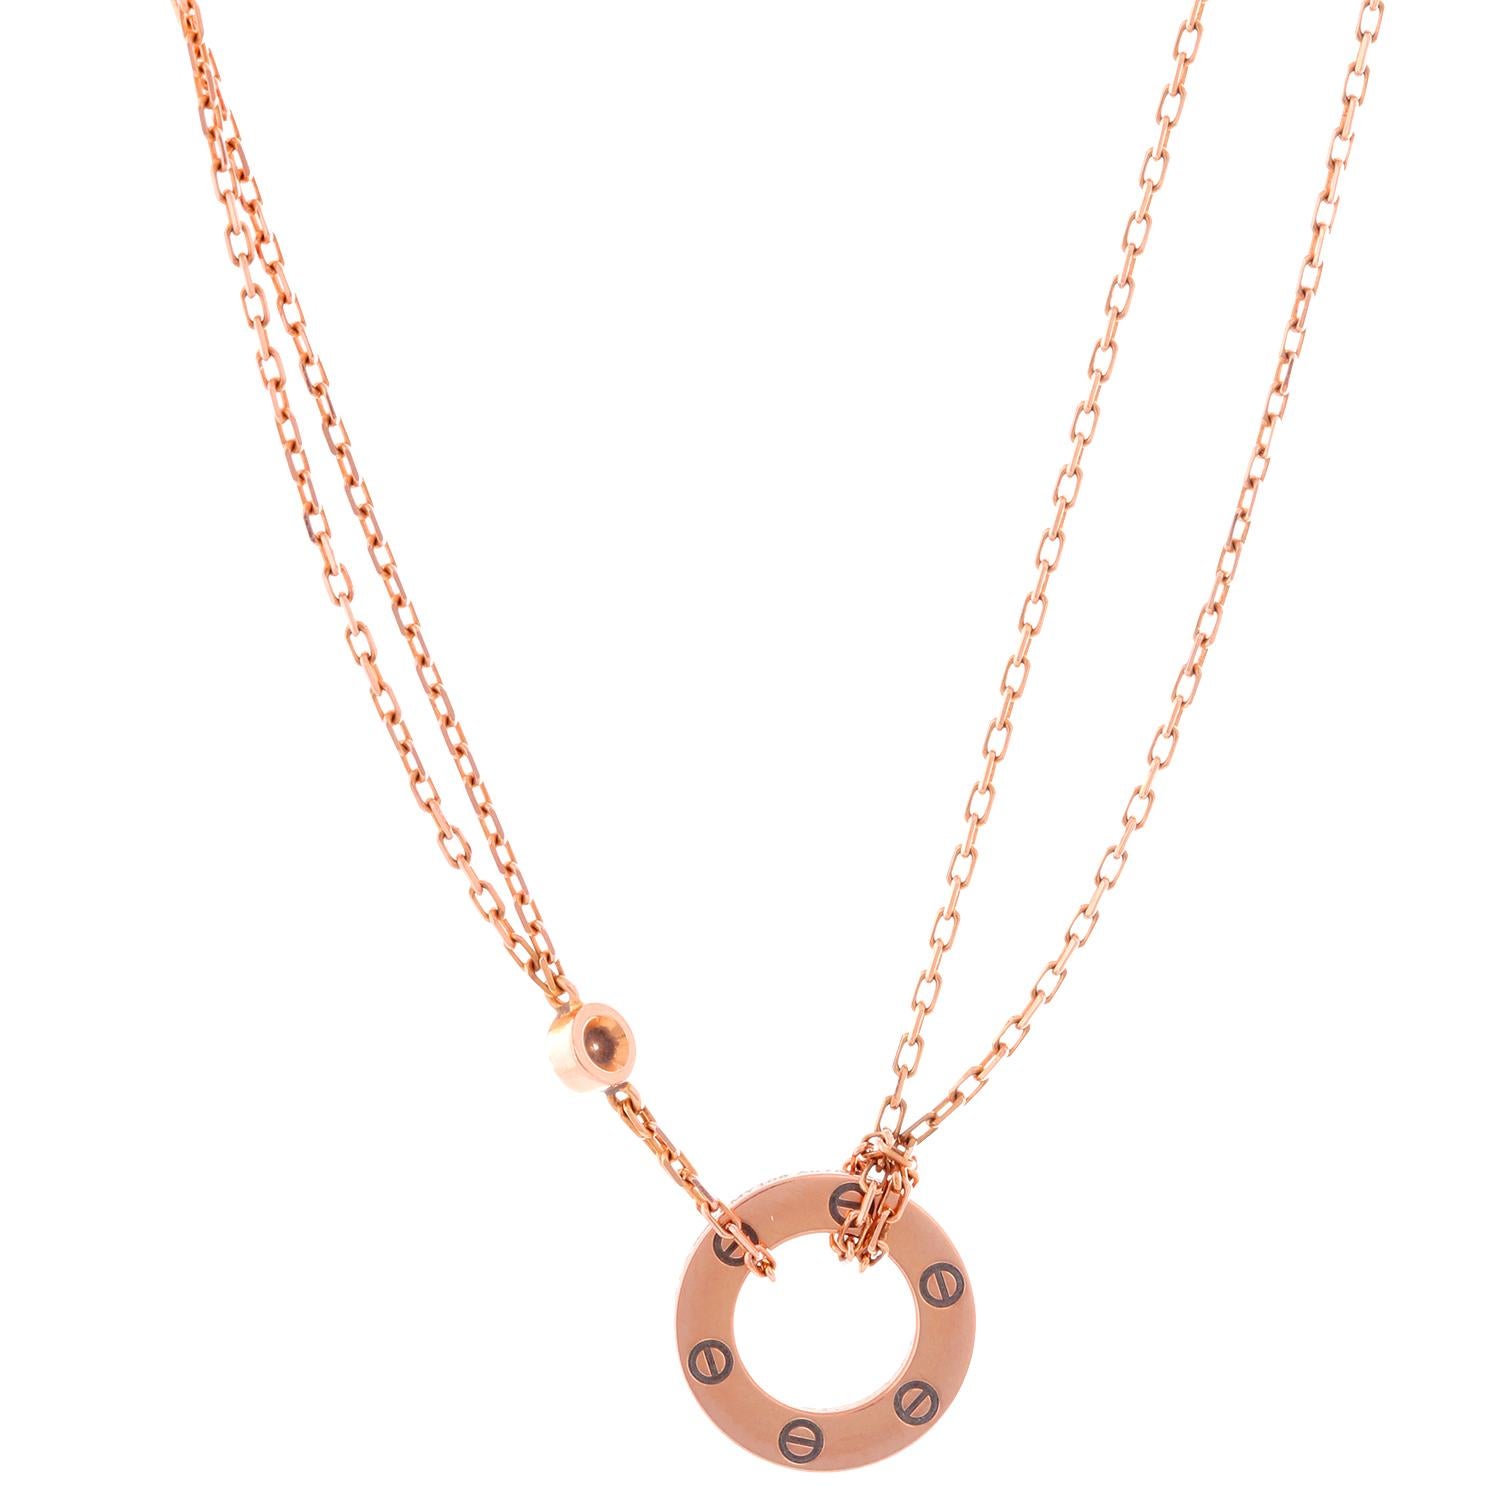 Cartier LOVE 18K Rose Gold Necklace  - 18K rose gold set with 2 brilliant cut diamonds totaling .03 cts. Inner diameter 7.8 mm - Chain length 15 inches. Pre-owned with custom box .